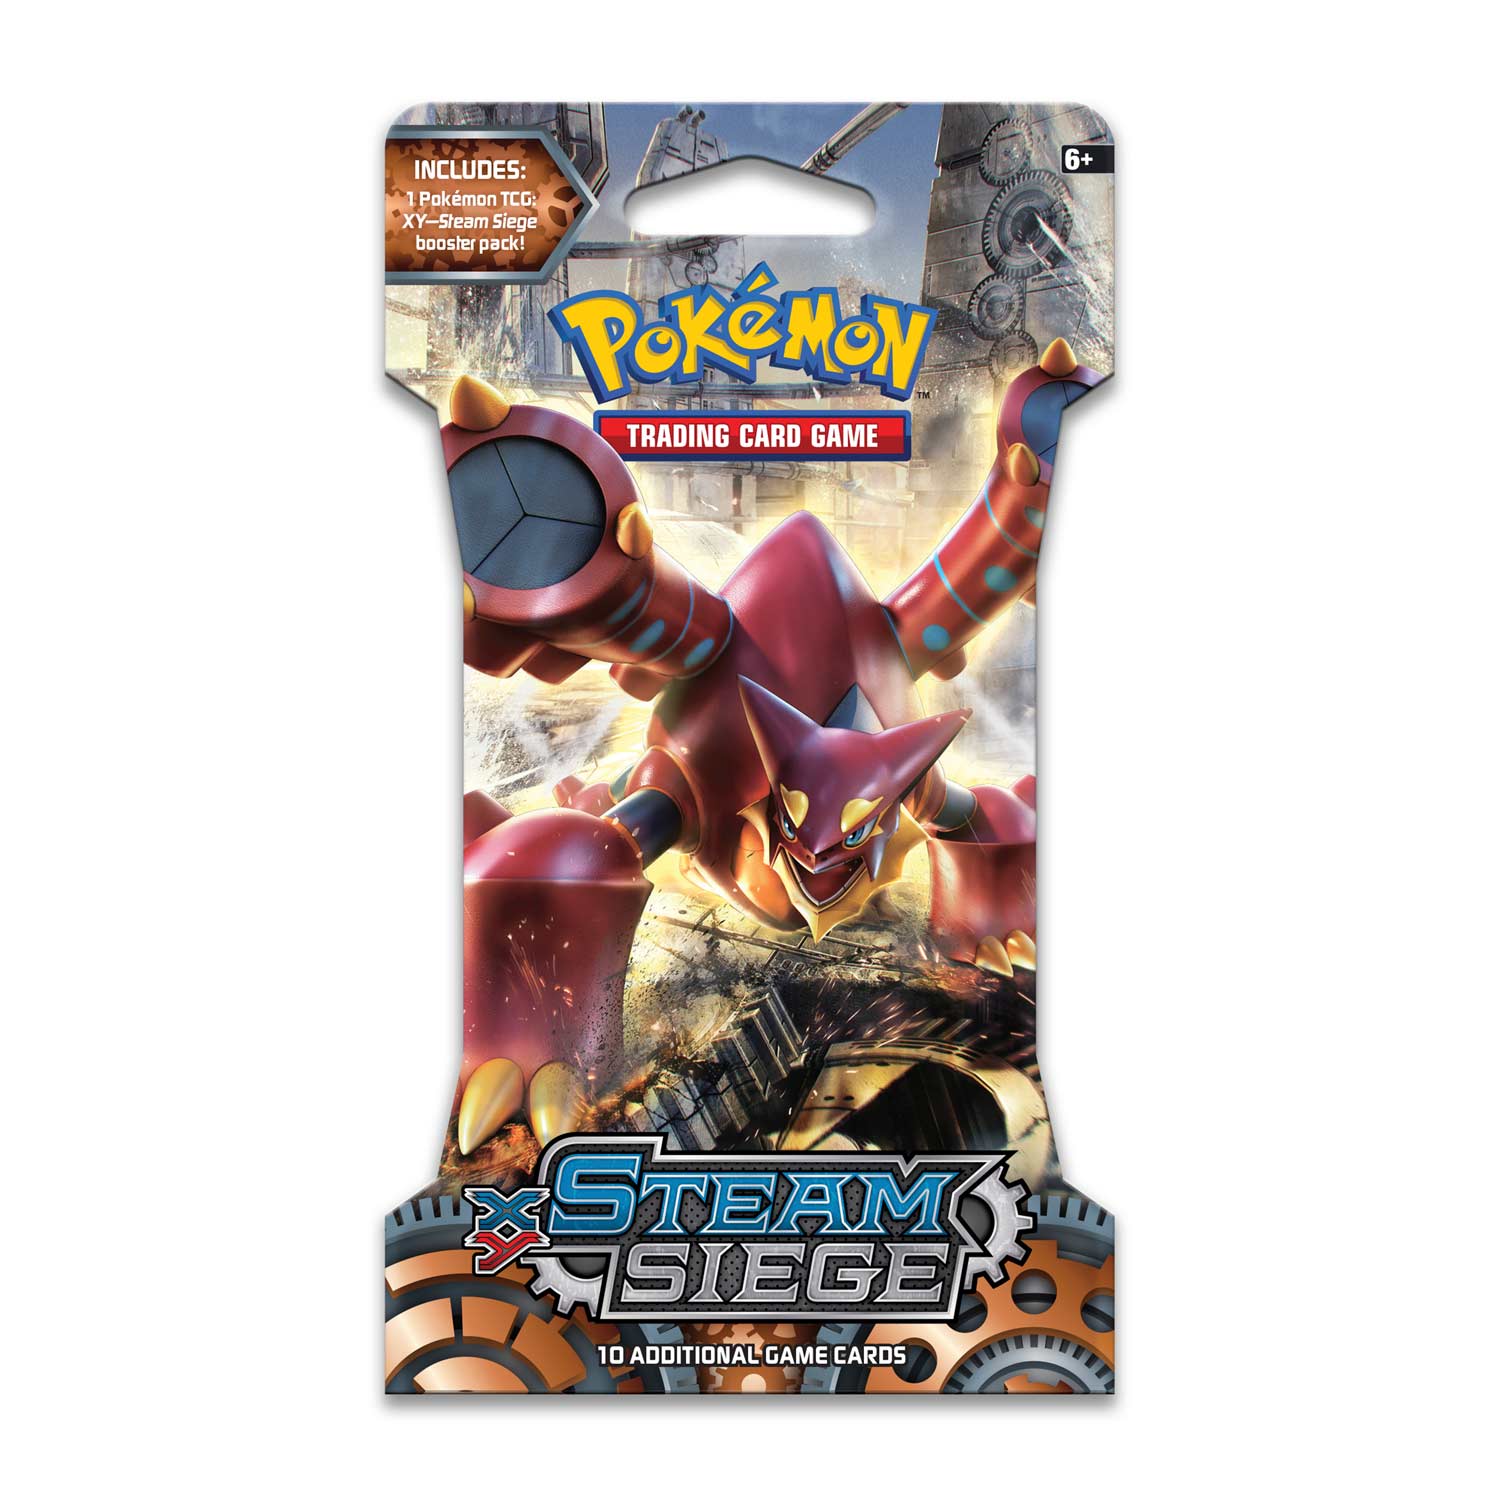 Pokemon  Steam Siege Booster Packs Your choice on the number of packs